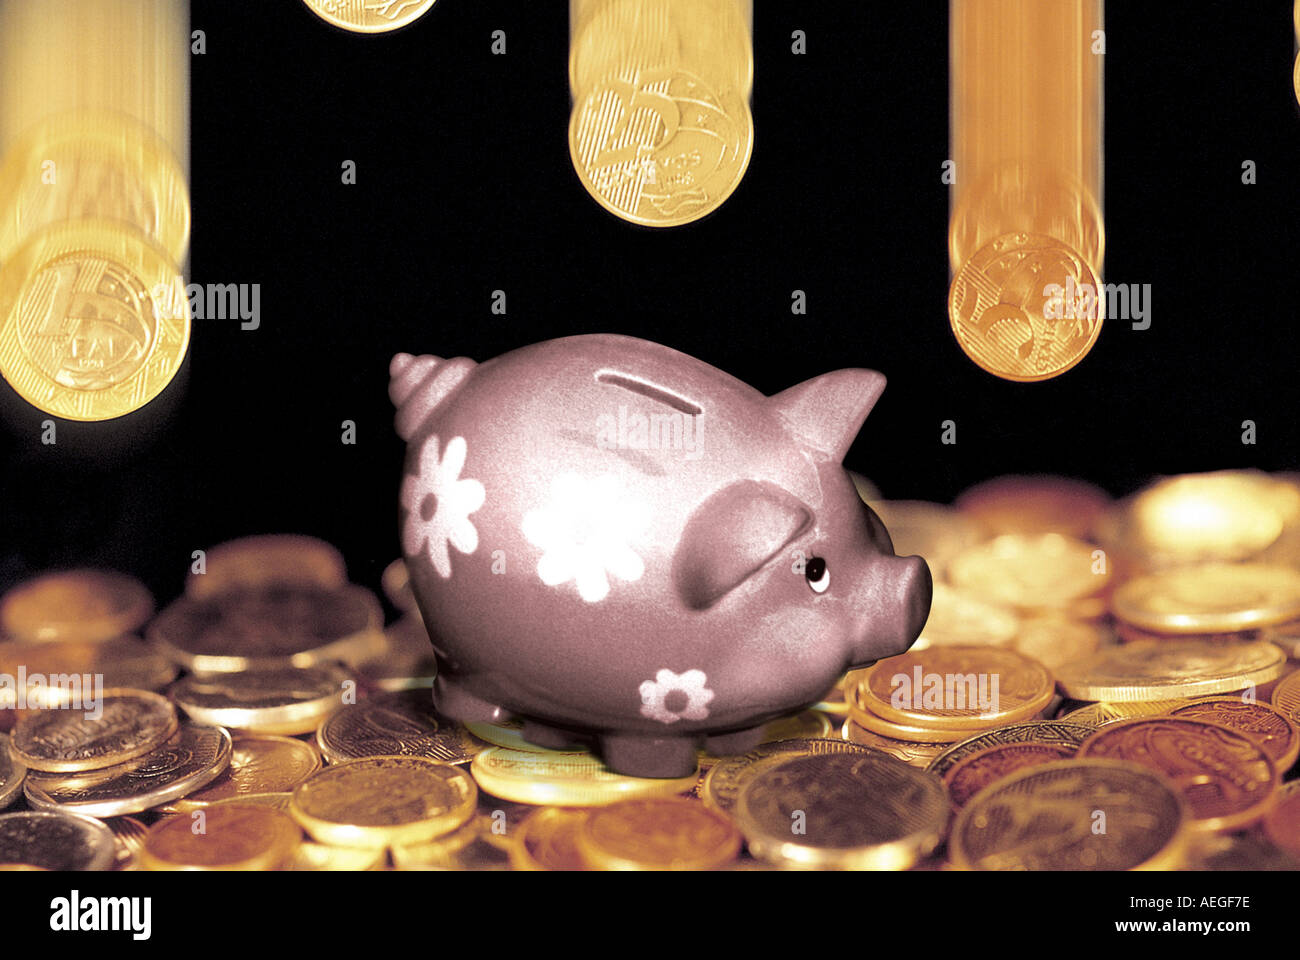 Office piggy bank savings coins falling money currency coin senses miscellaneous background texture Stock Photo